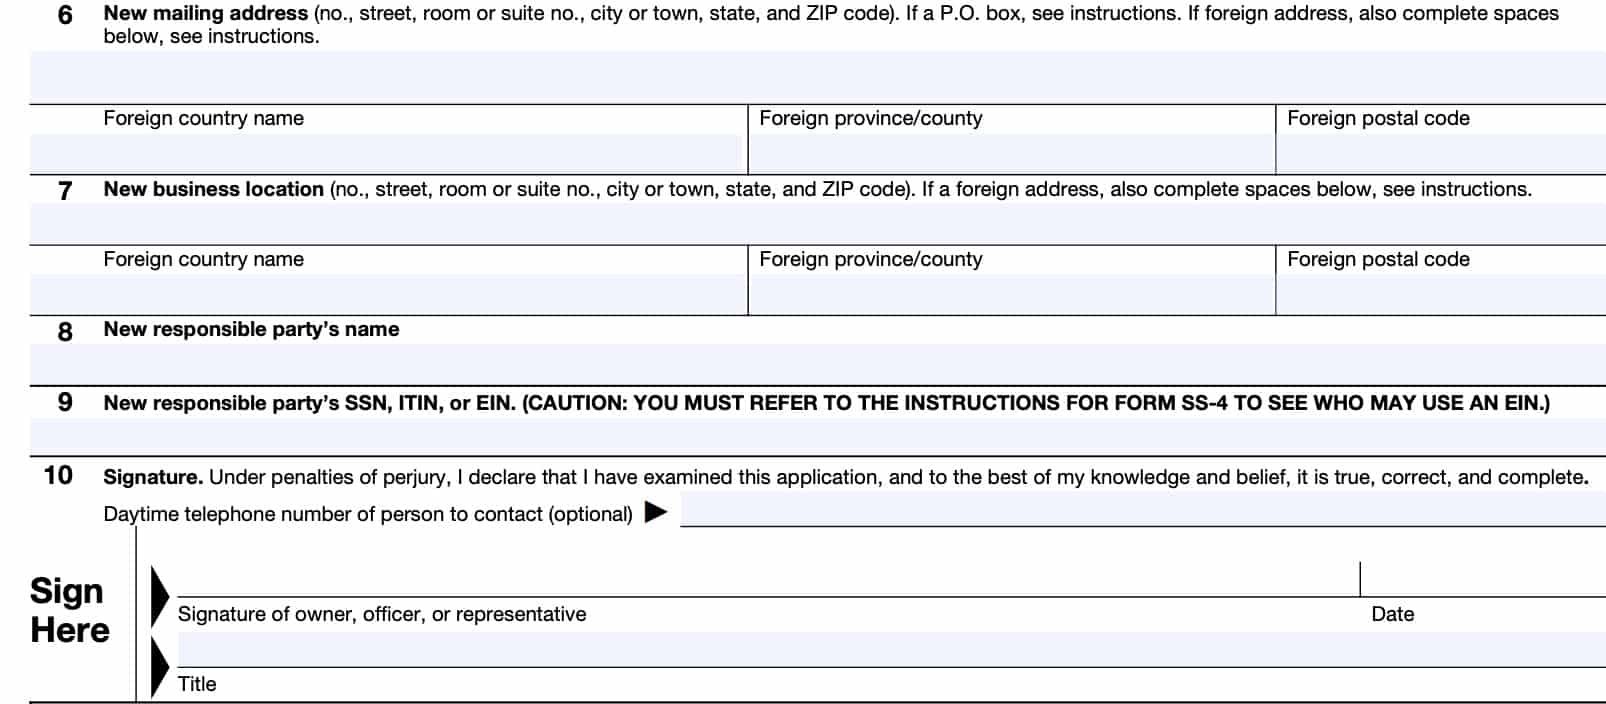 irs form 8822-b, change of address or responsible party - business, bottom